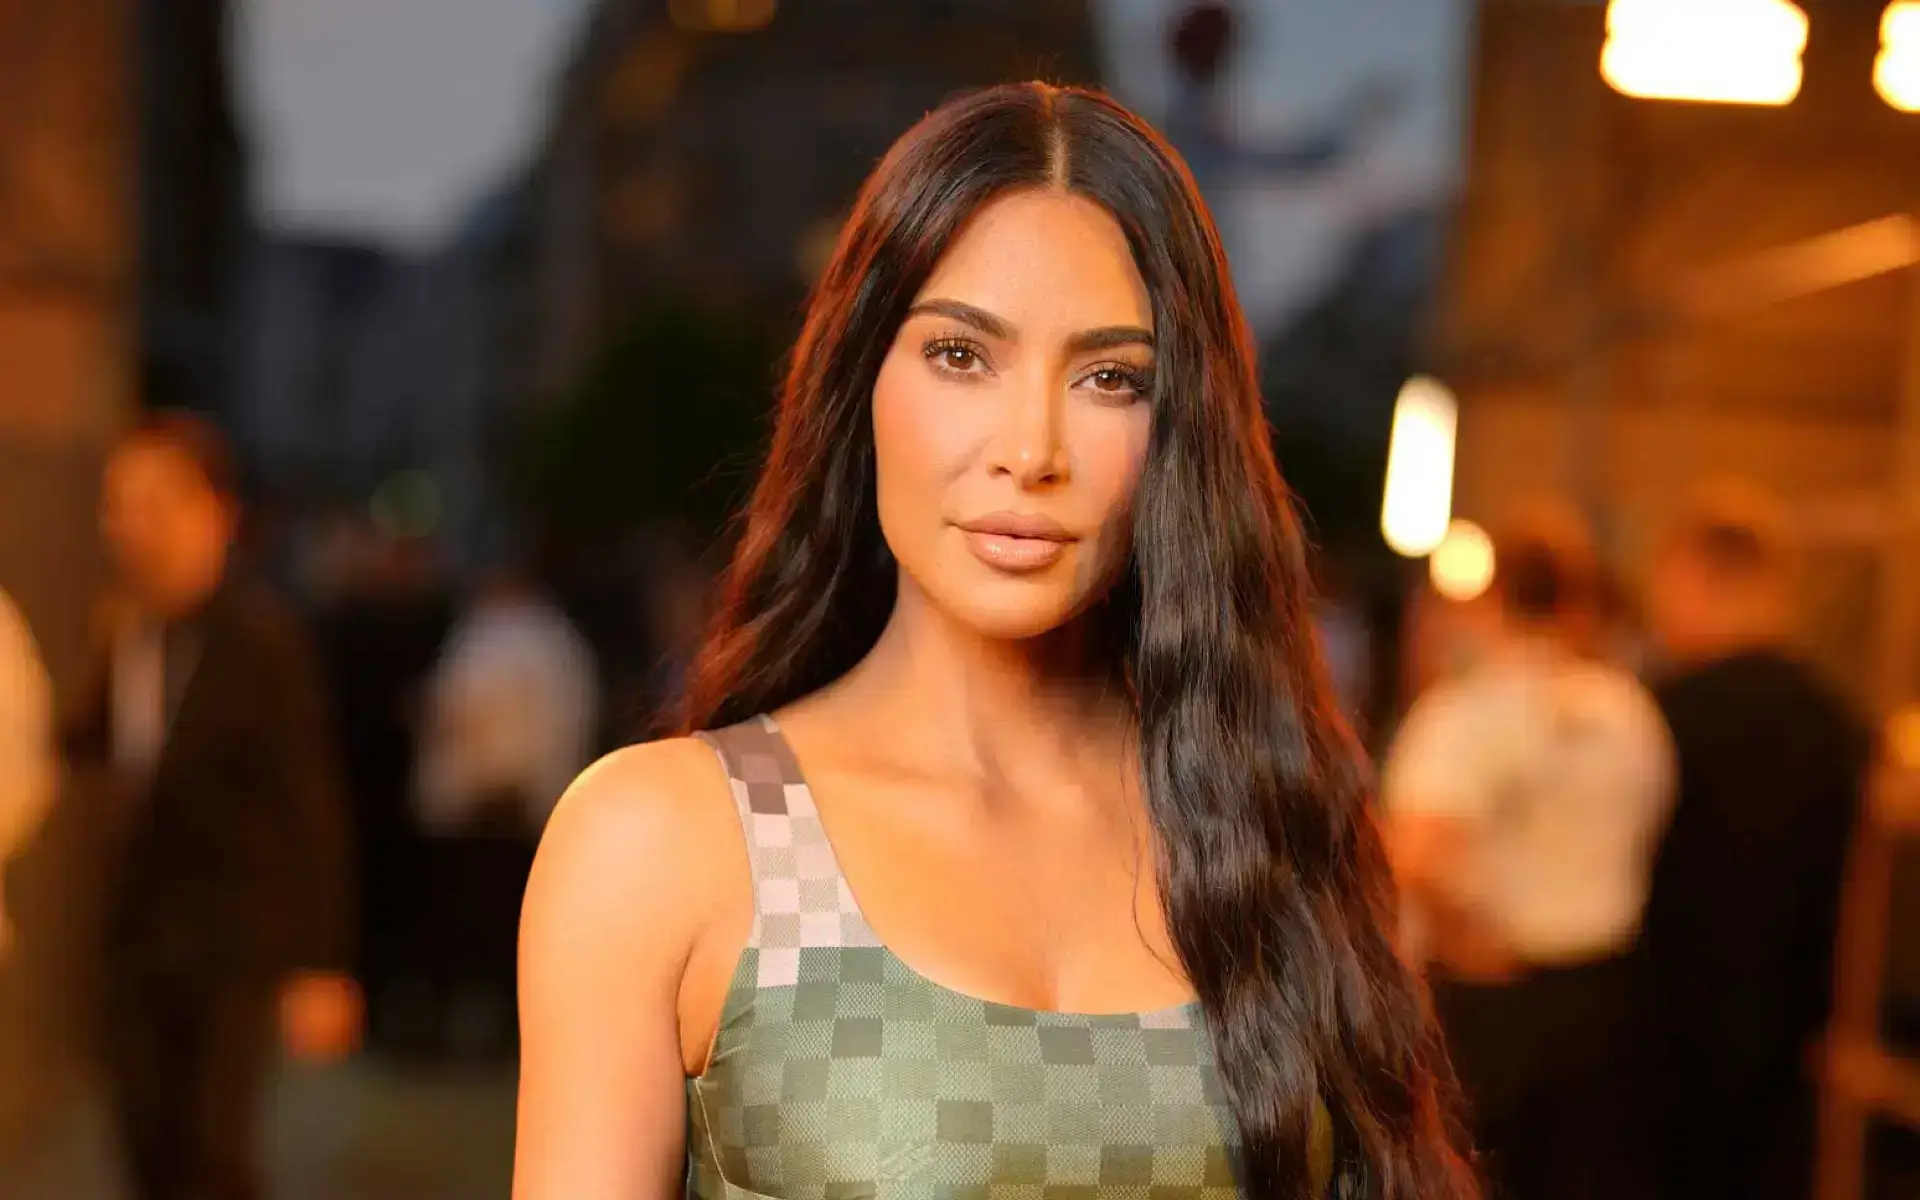 Kim Kardashian: Taking a Leap into the Thriller Genre After American Horror Story Role